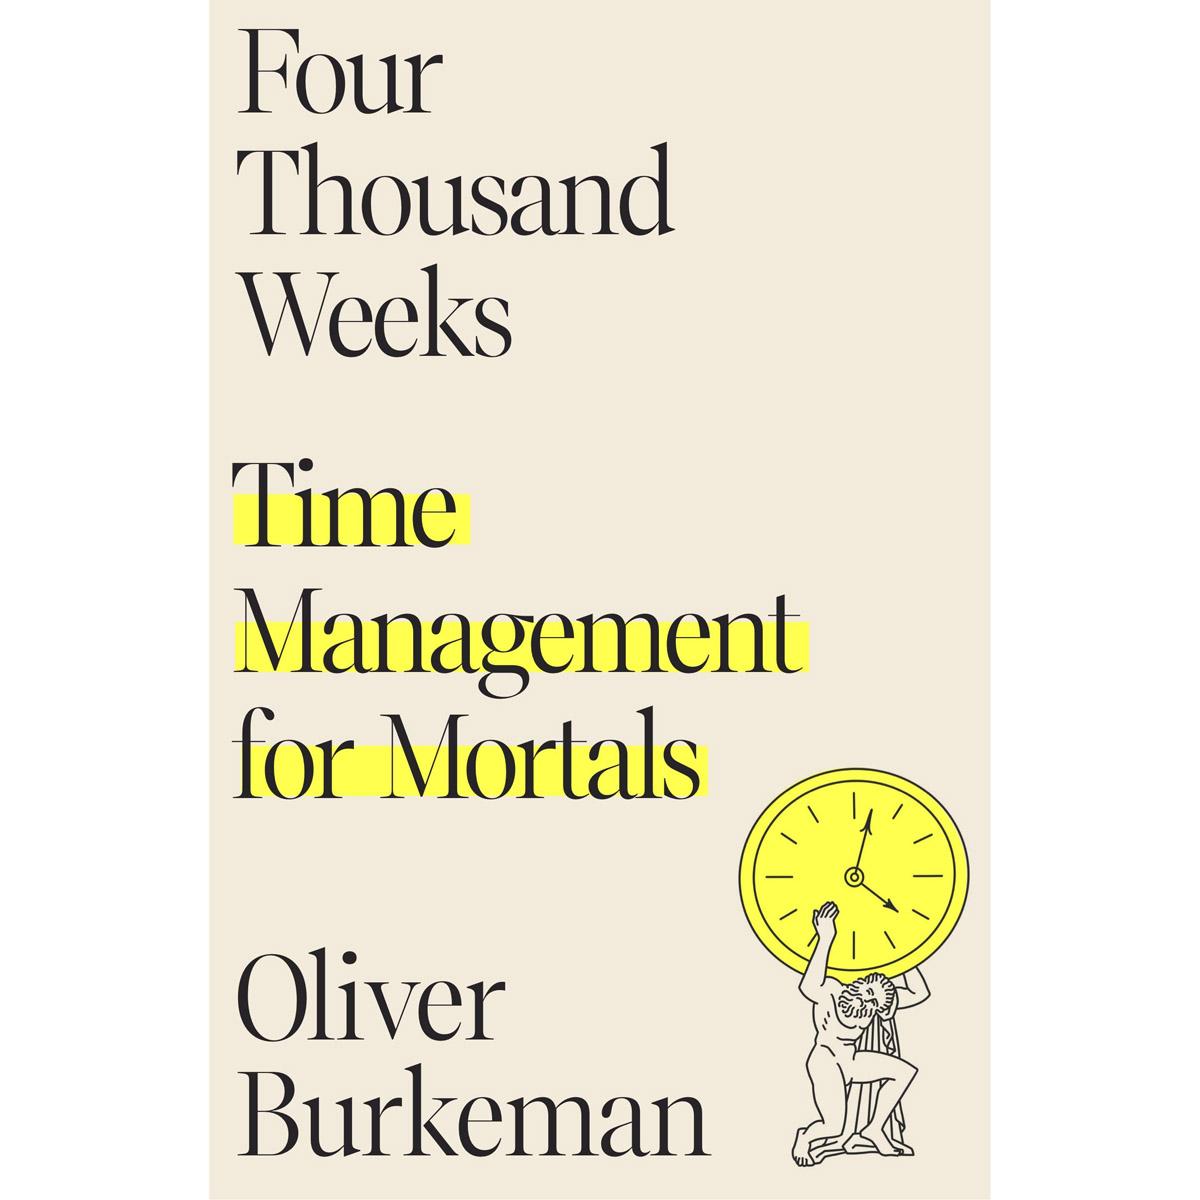 Four Thousand Weeks Time Management for Mortals eBook for $2.99